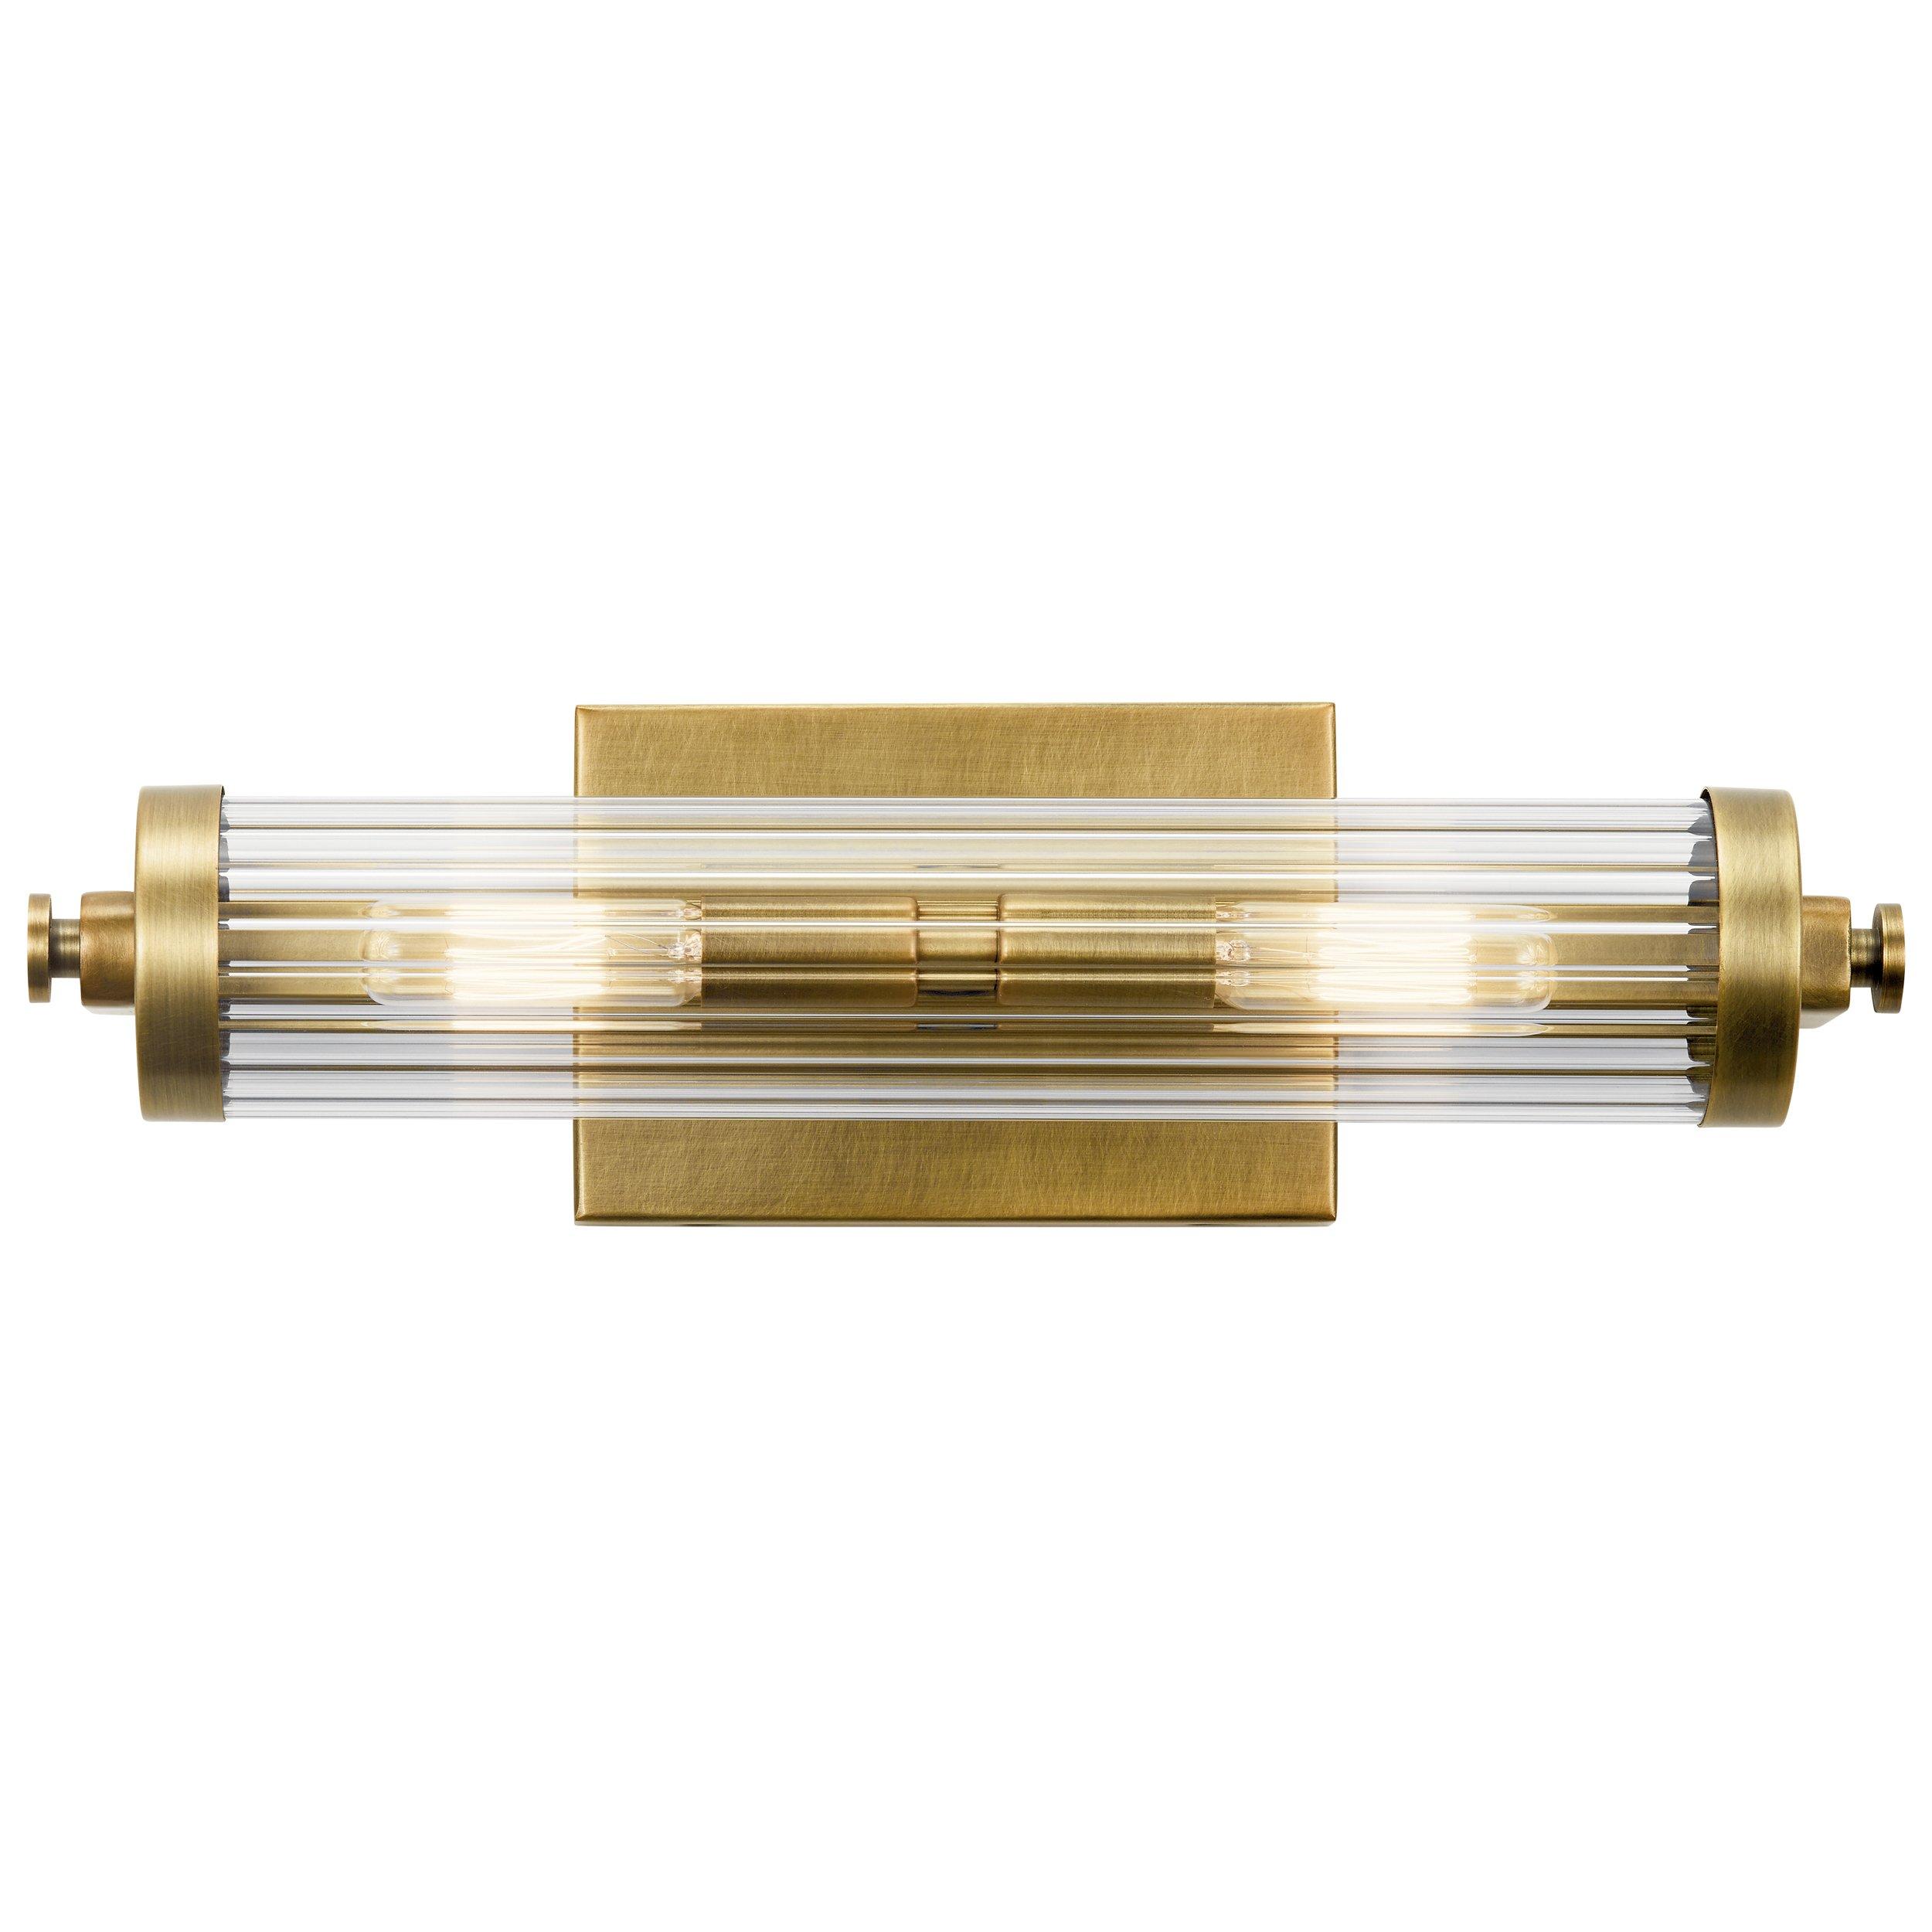 Azores Natural Brass Sconce